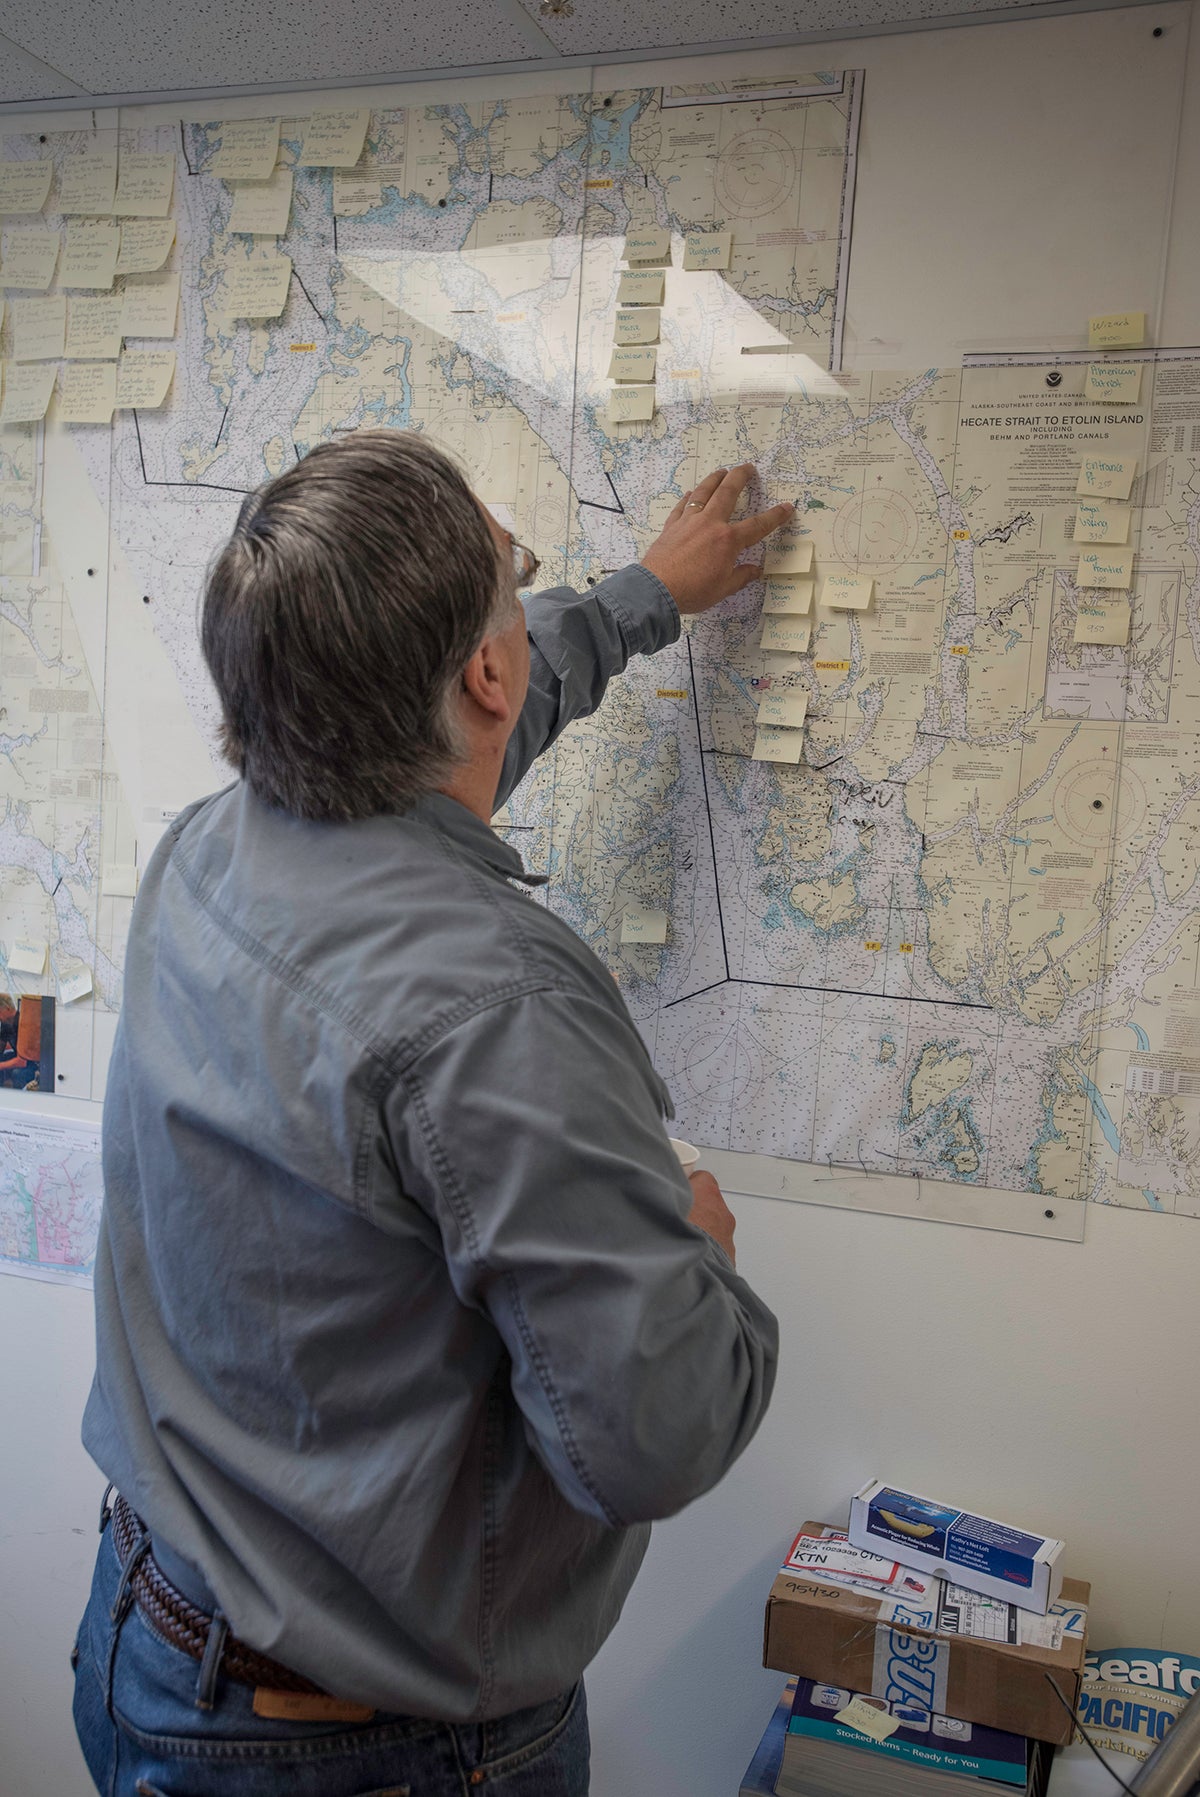 Man standing, looking at map in an office